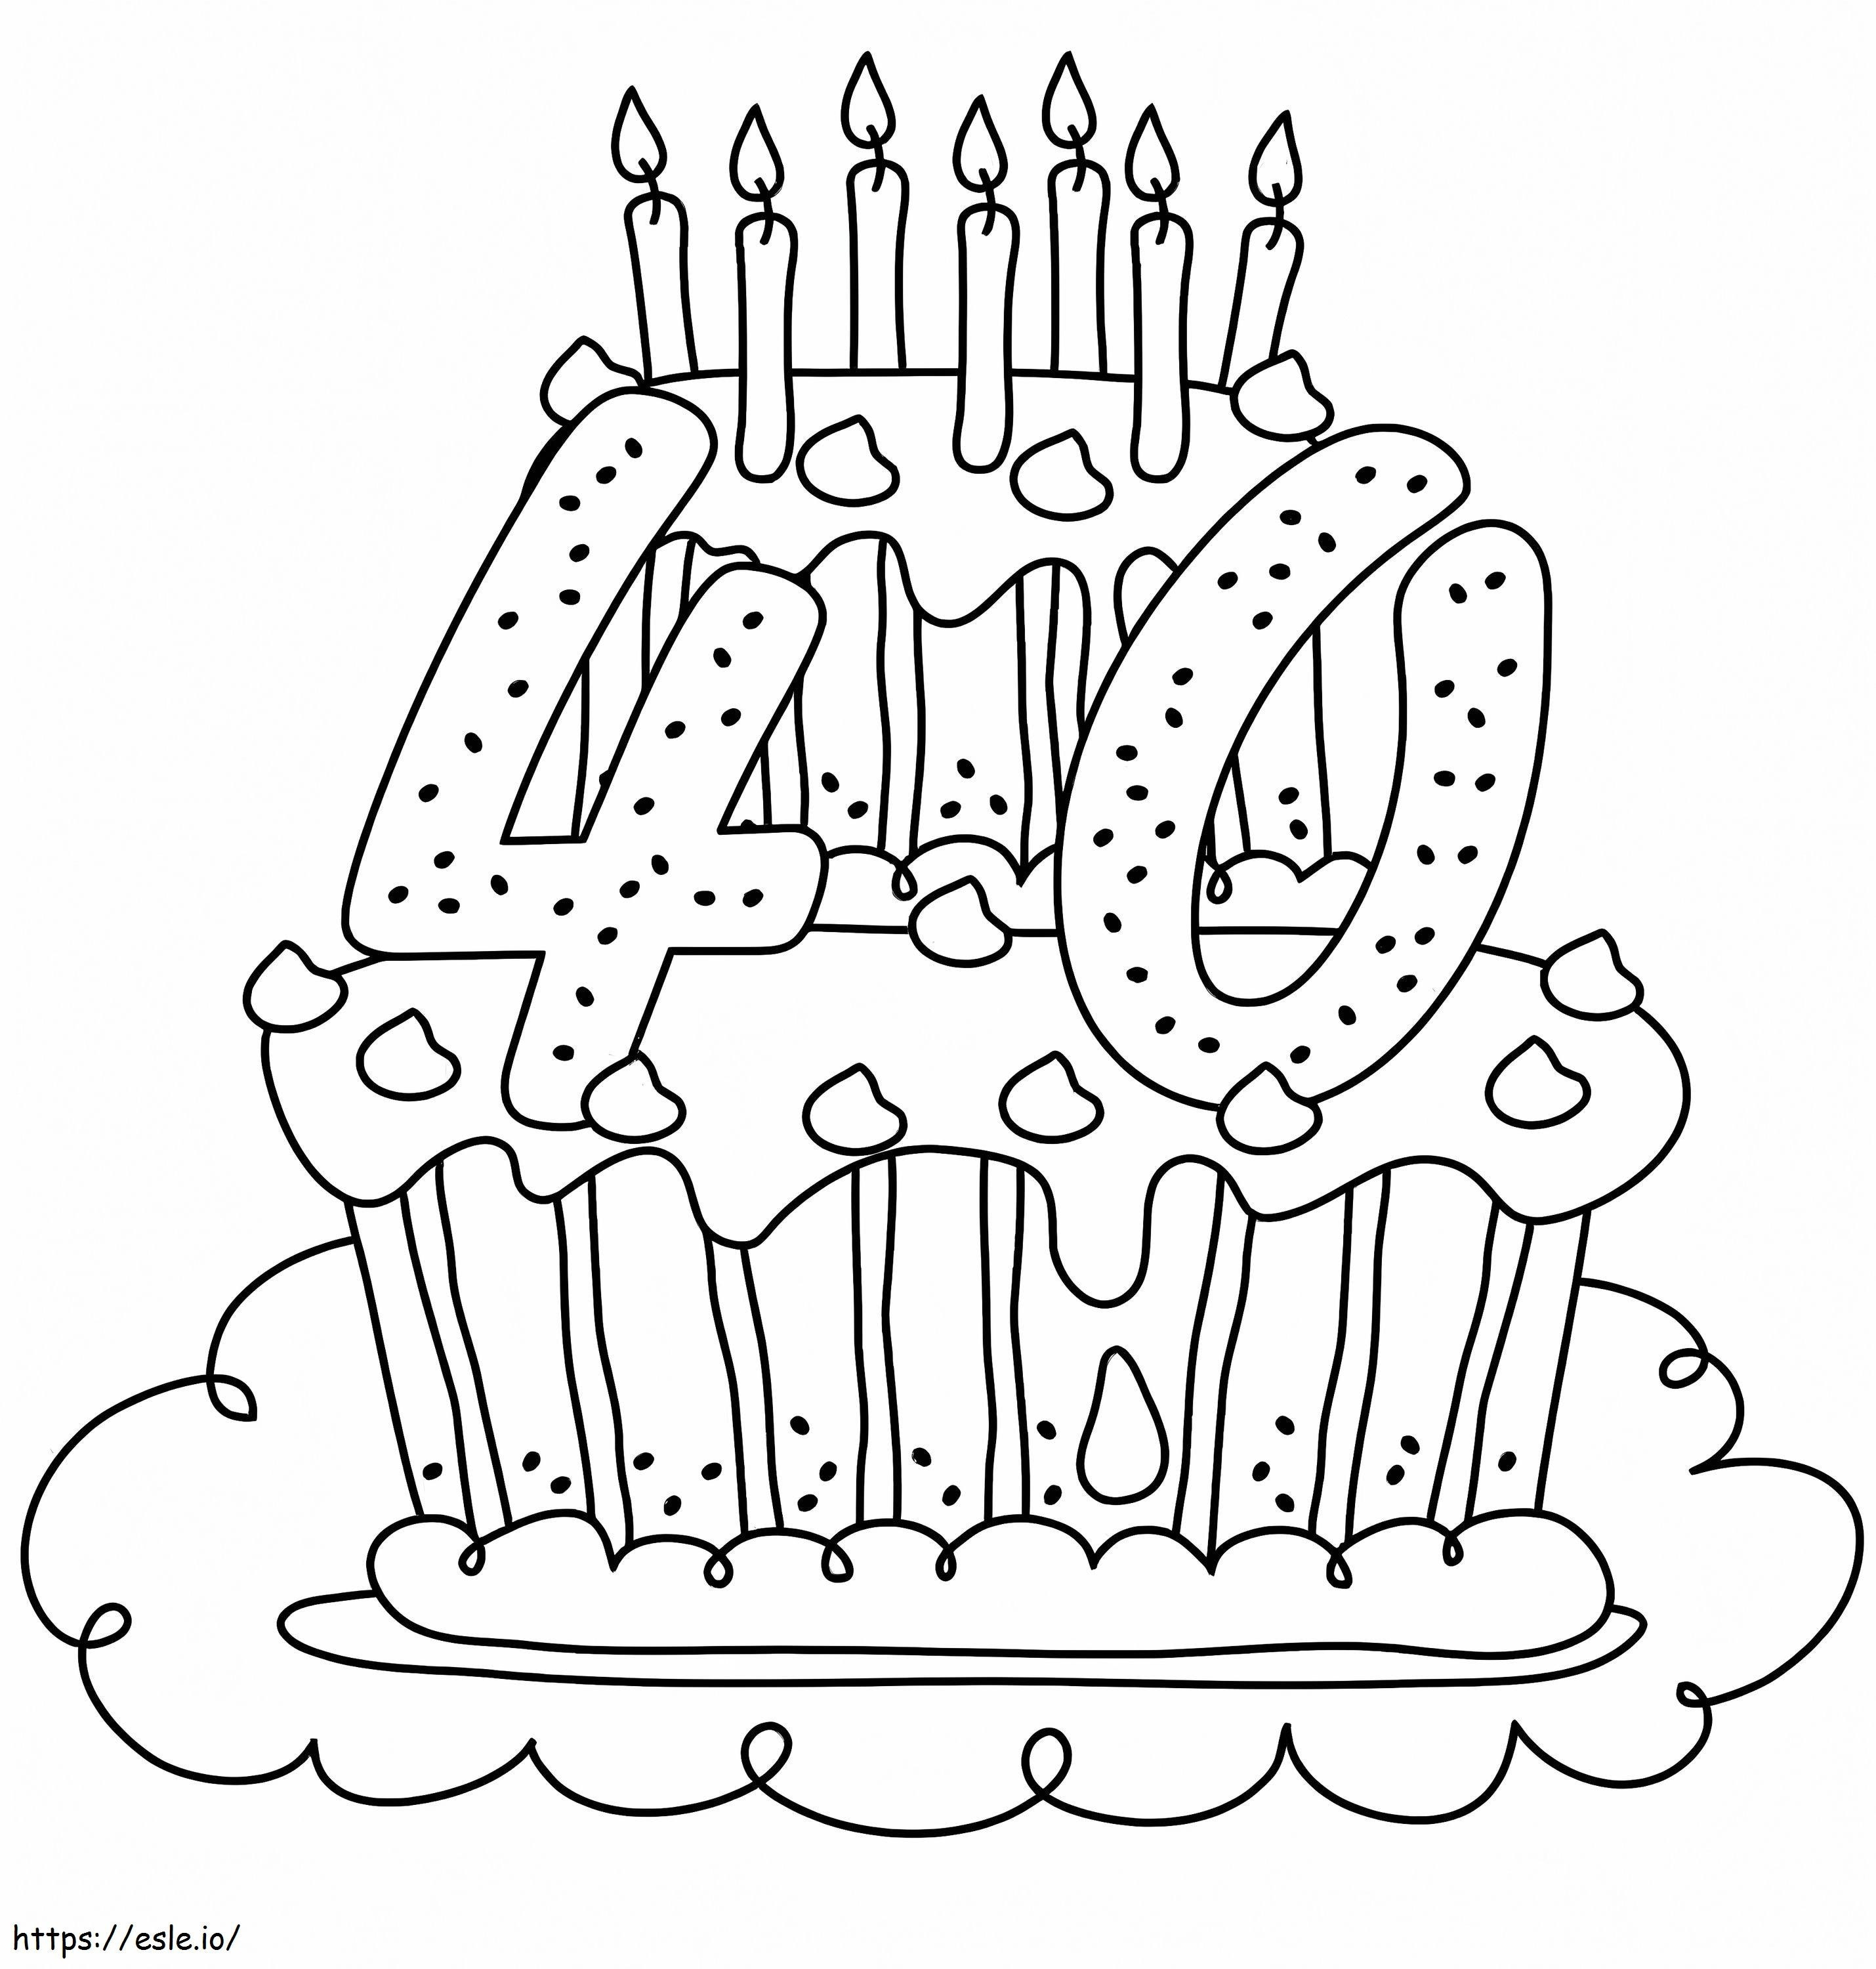 40Th Birthday Cake coloring page